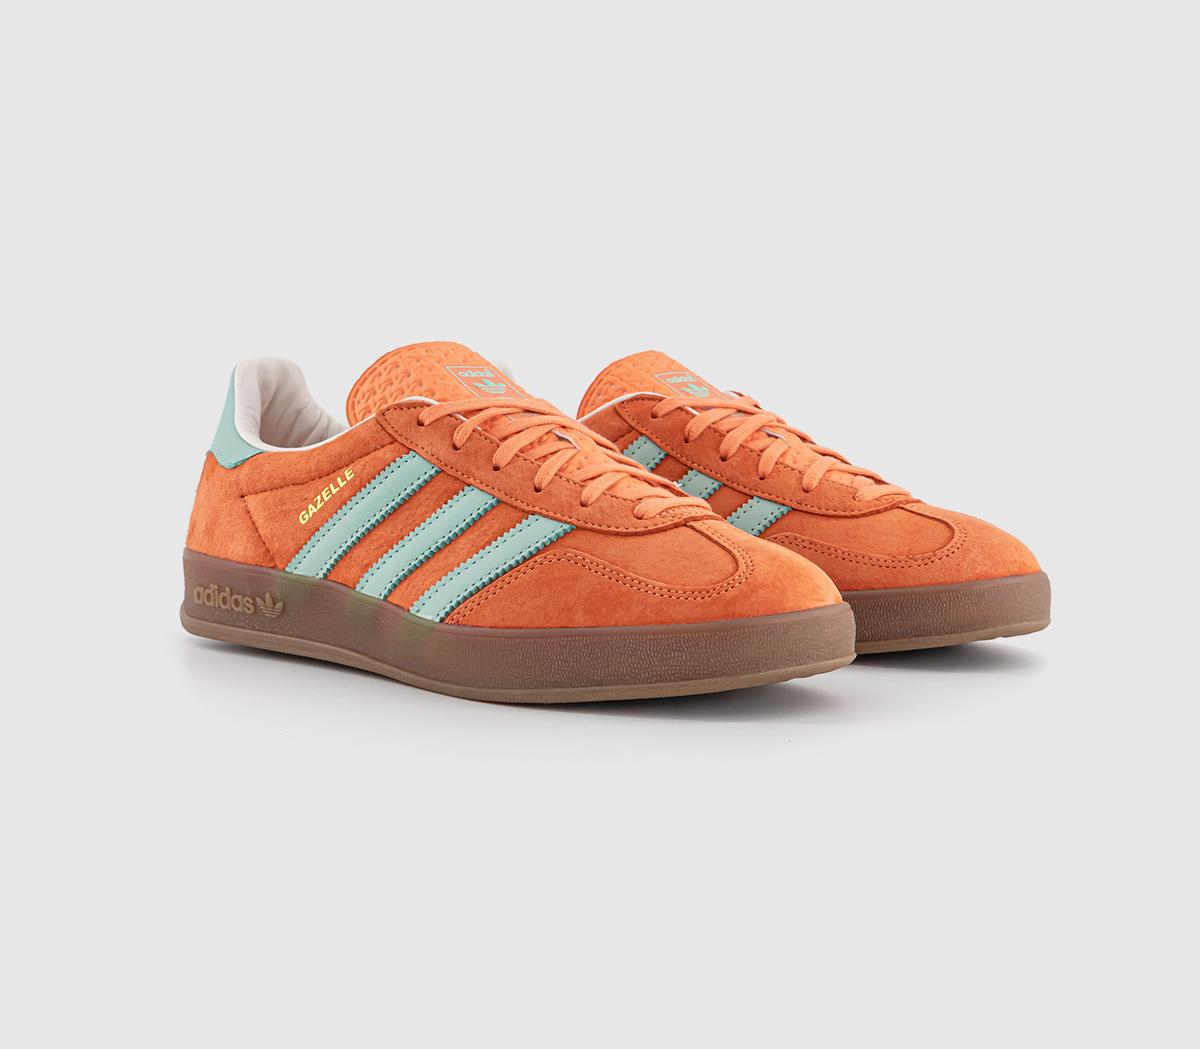 Adidas Gazelle Indoor Trainers Easy Orange Clear Mint Gum Red, 11.5